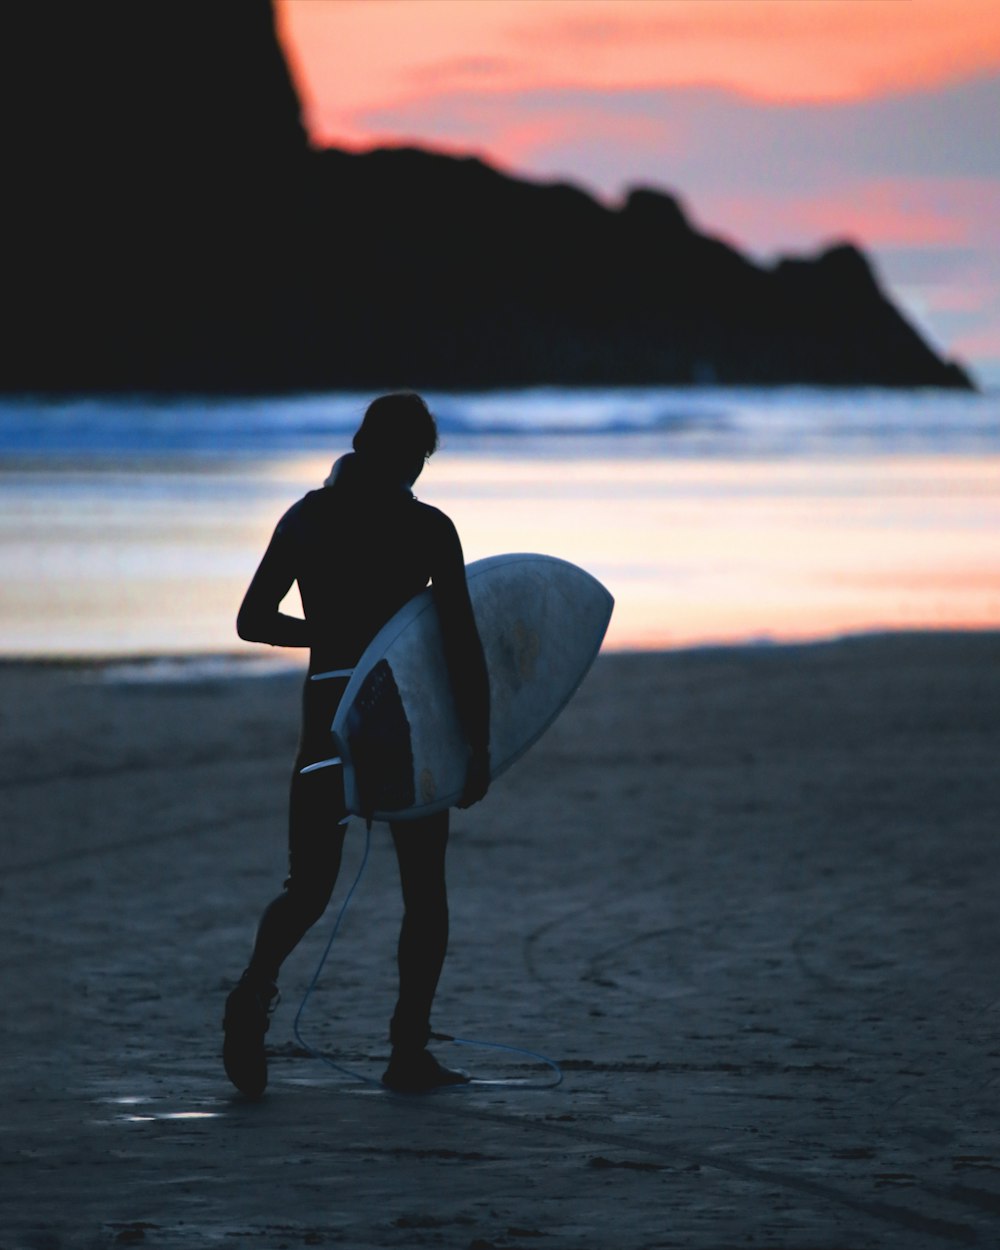 silhouette of woman holding surfboard walking on beach during sunset